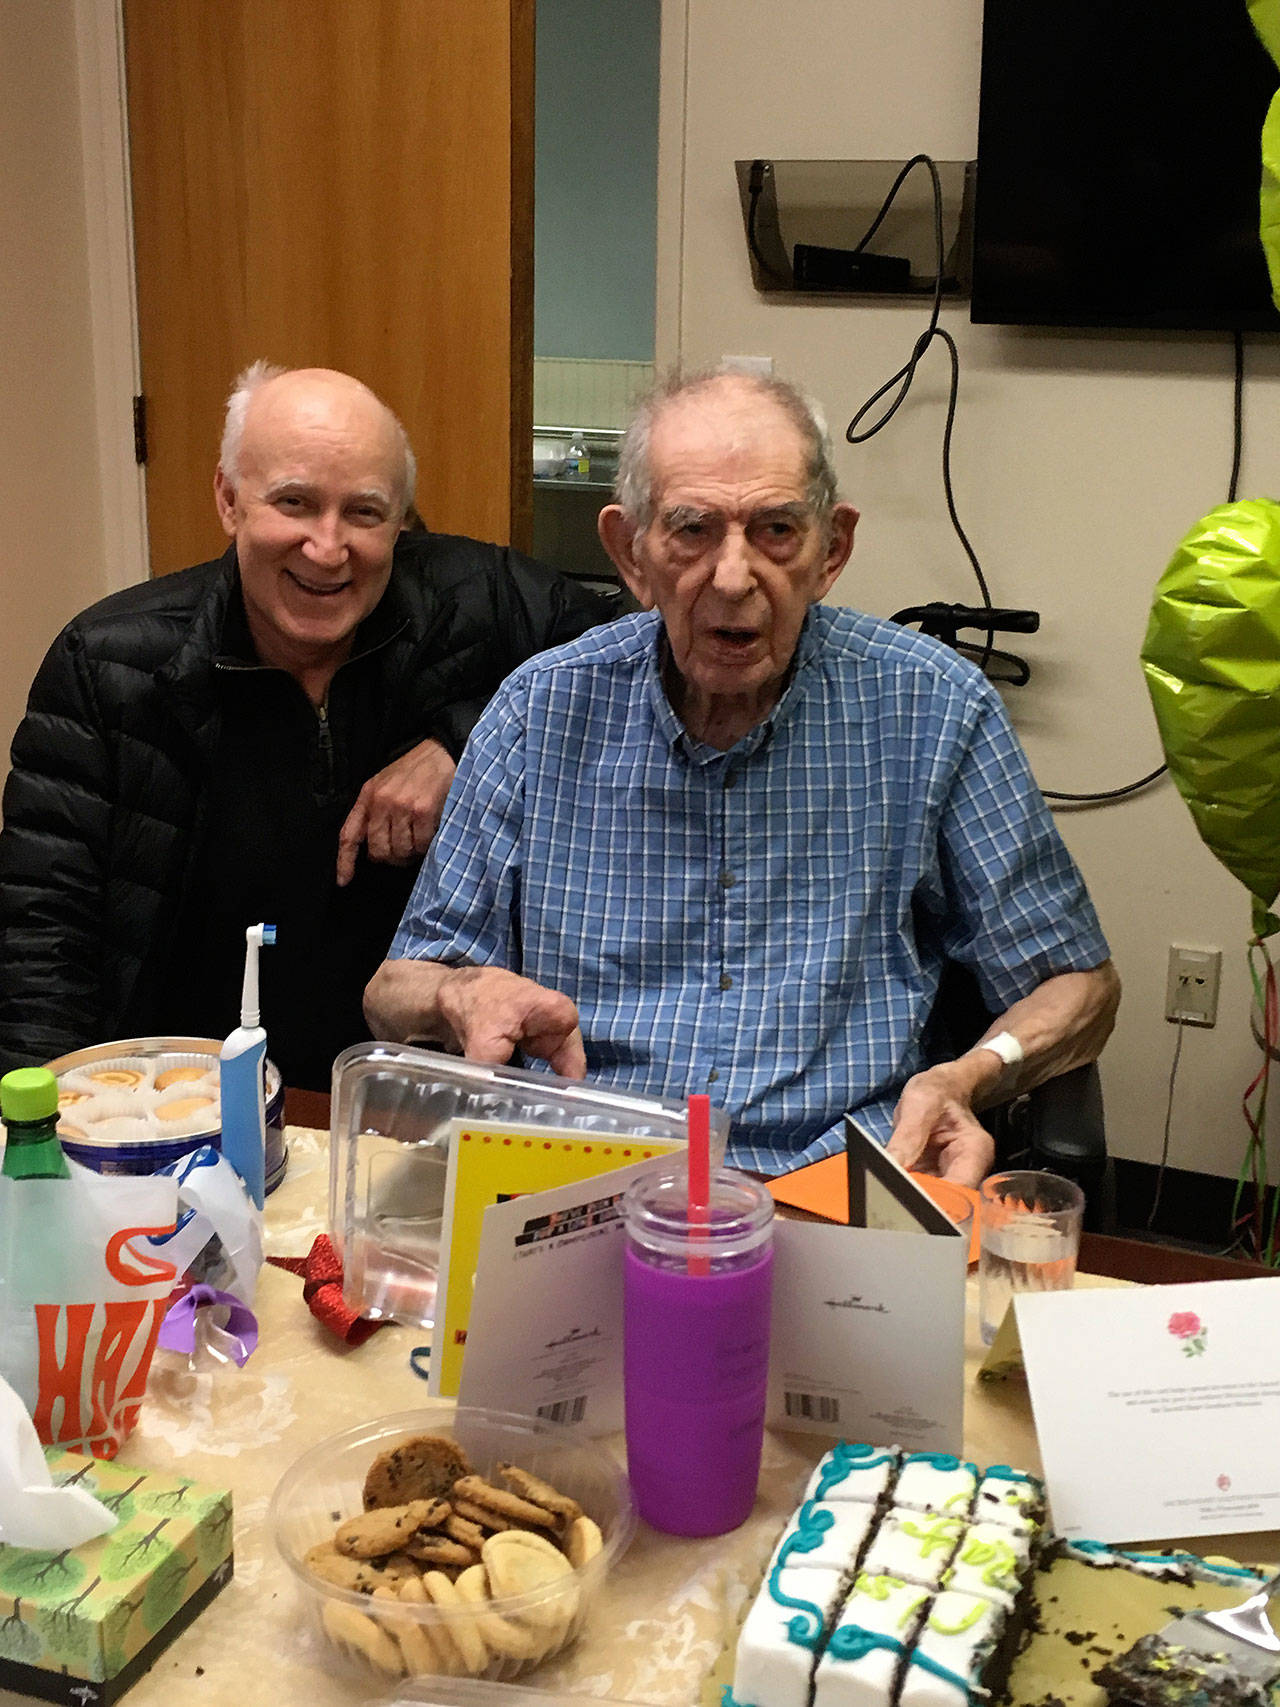 George Mosebar at a birthday celebration at the Redmond Senior Center. He turned 101 on March 26. Courtesy photo